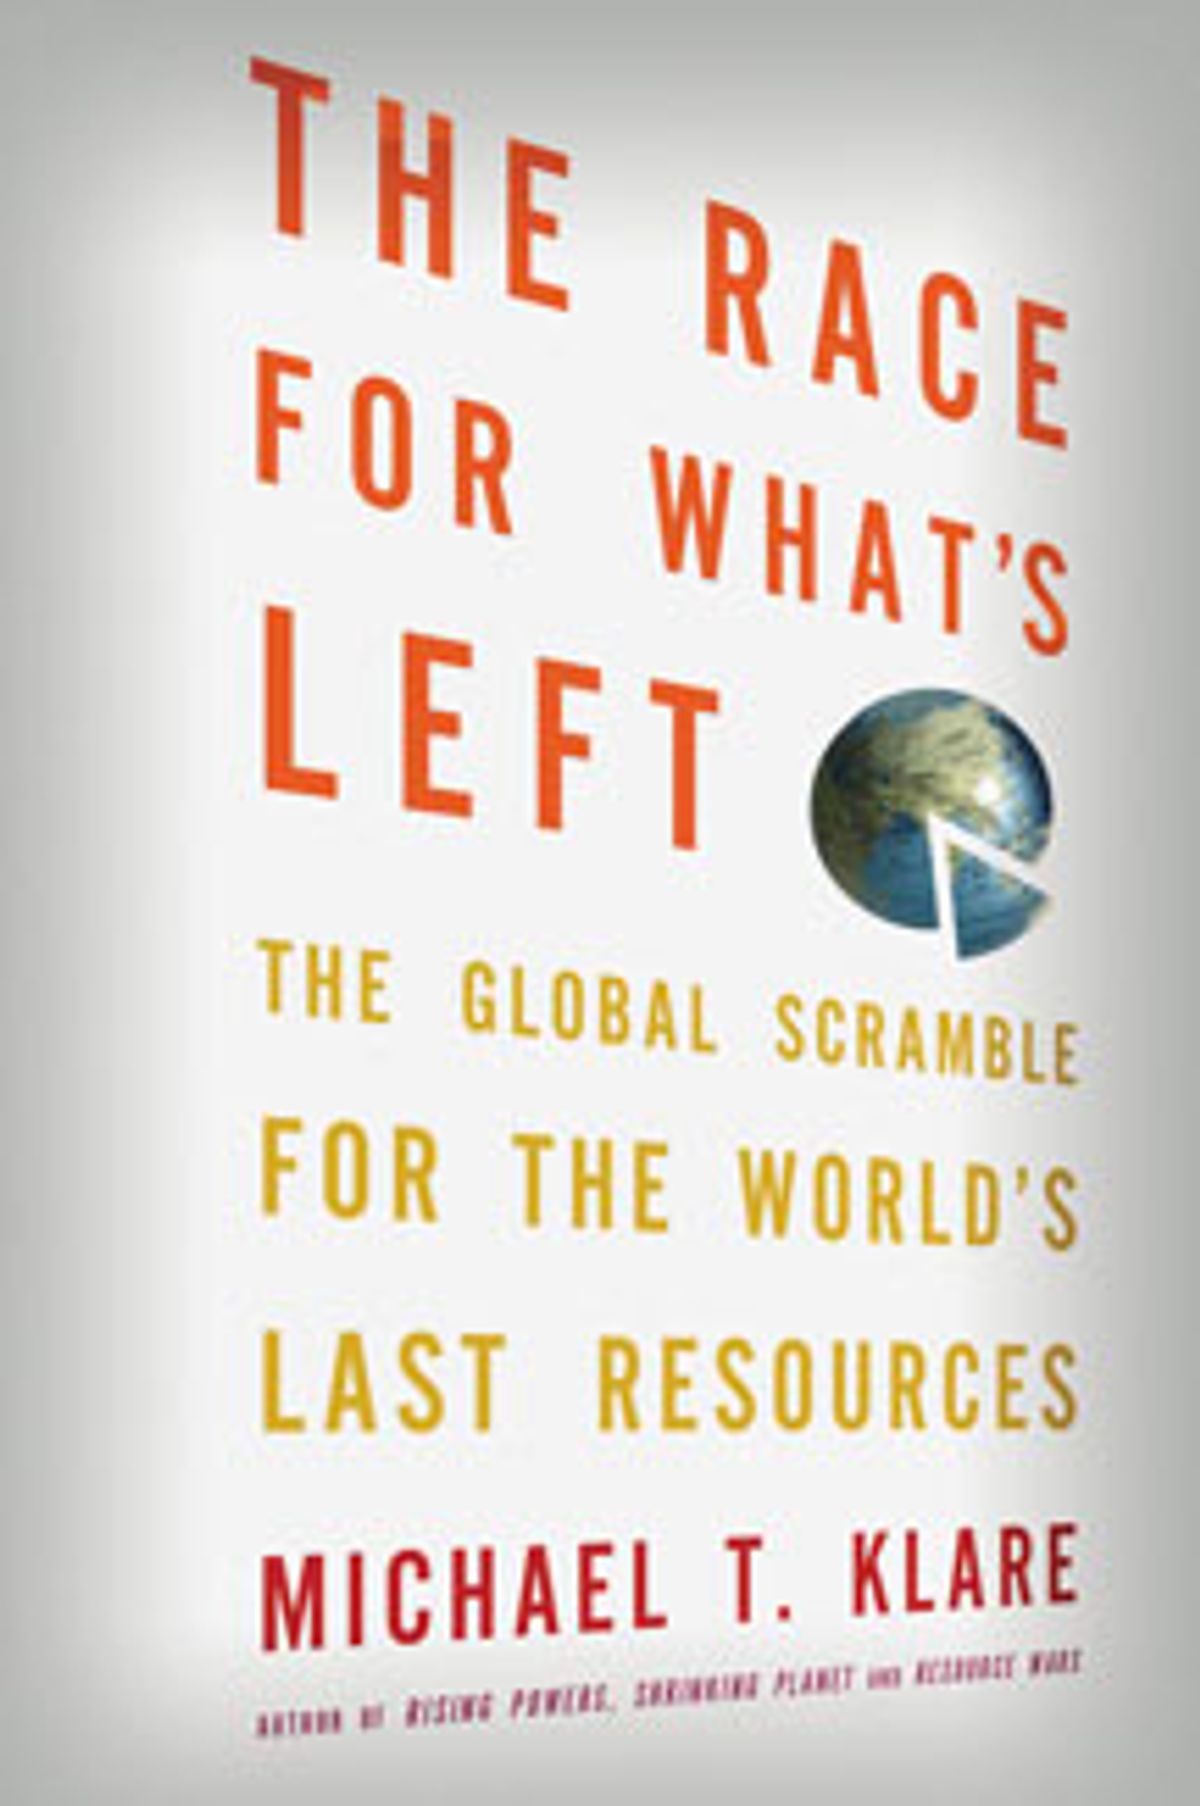 Book Review: The Race for What’s Left